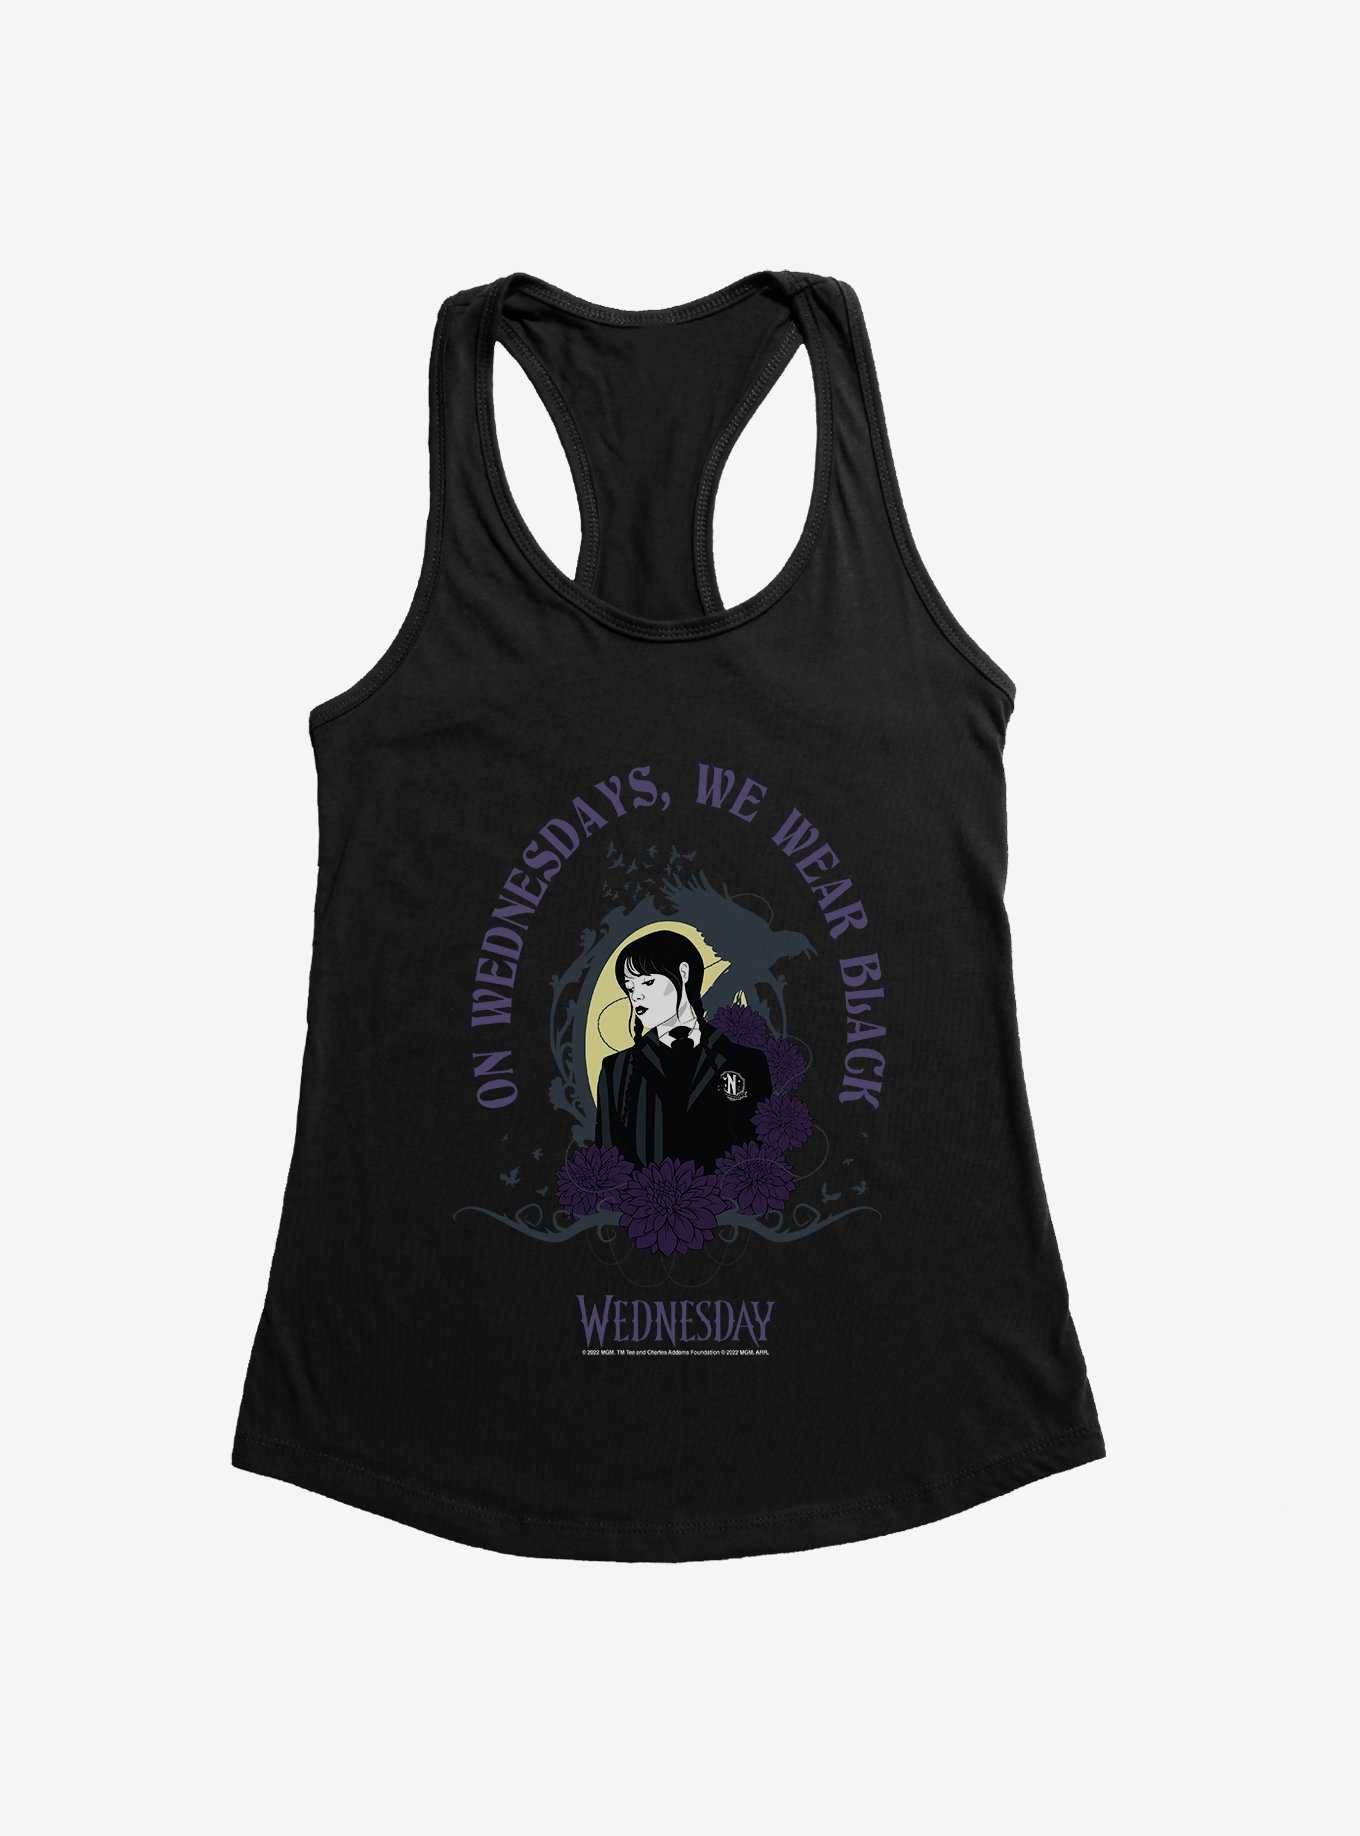 Wednesday On Wednesday's, We Wear Black Womens Tank Top, , hi-res